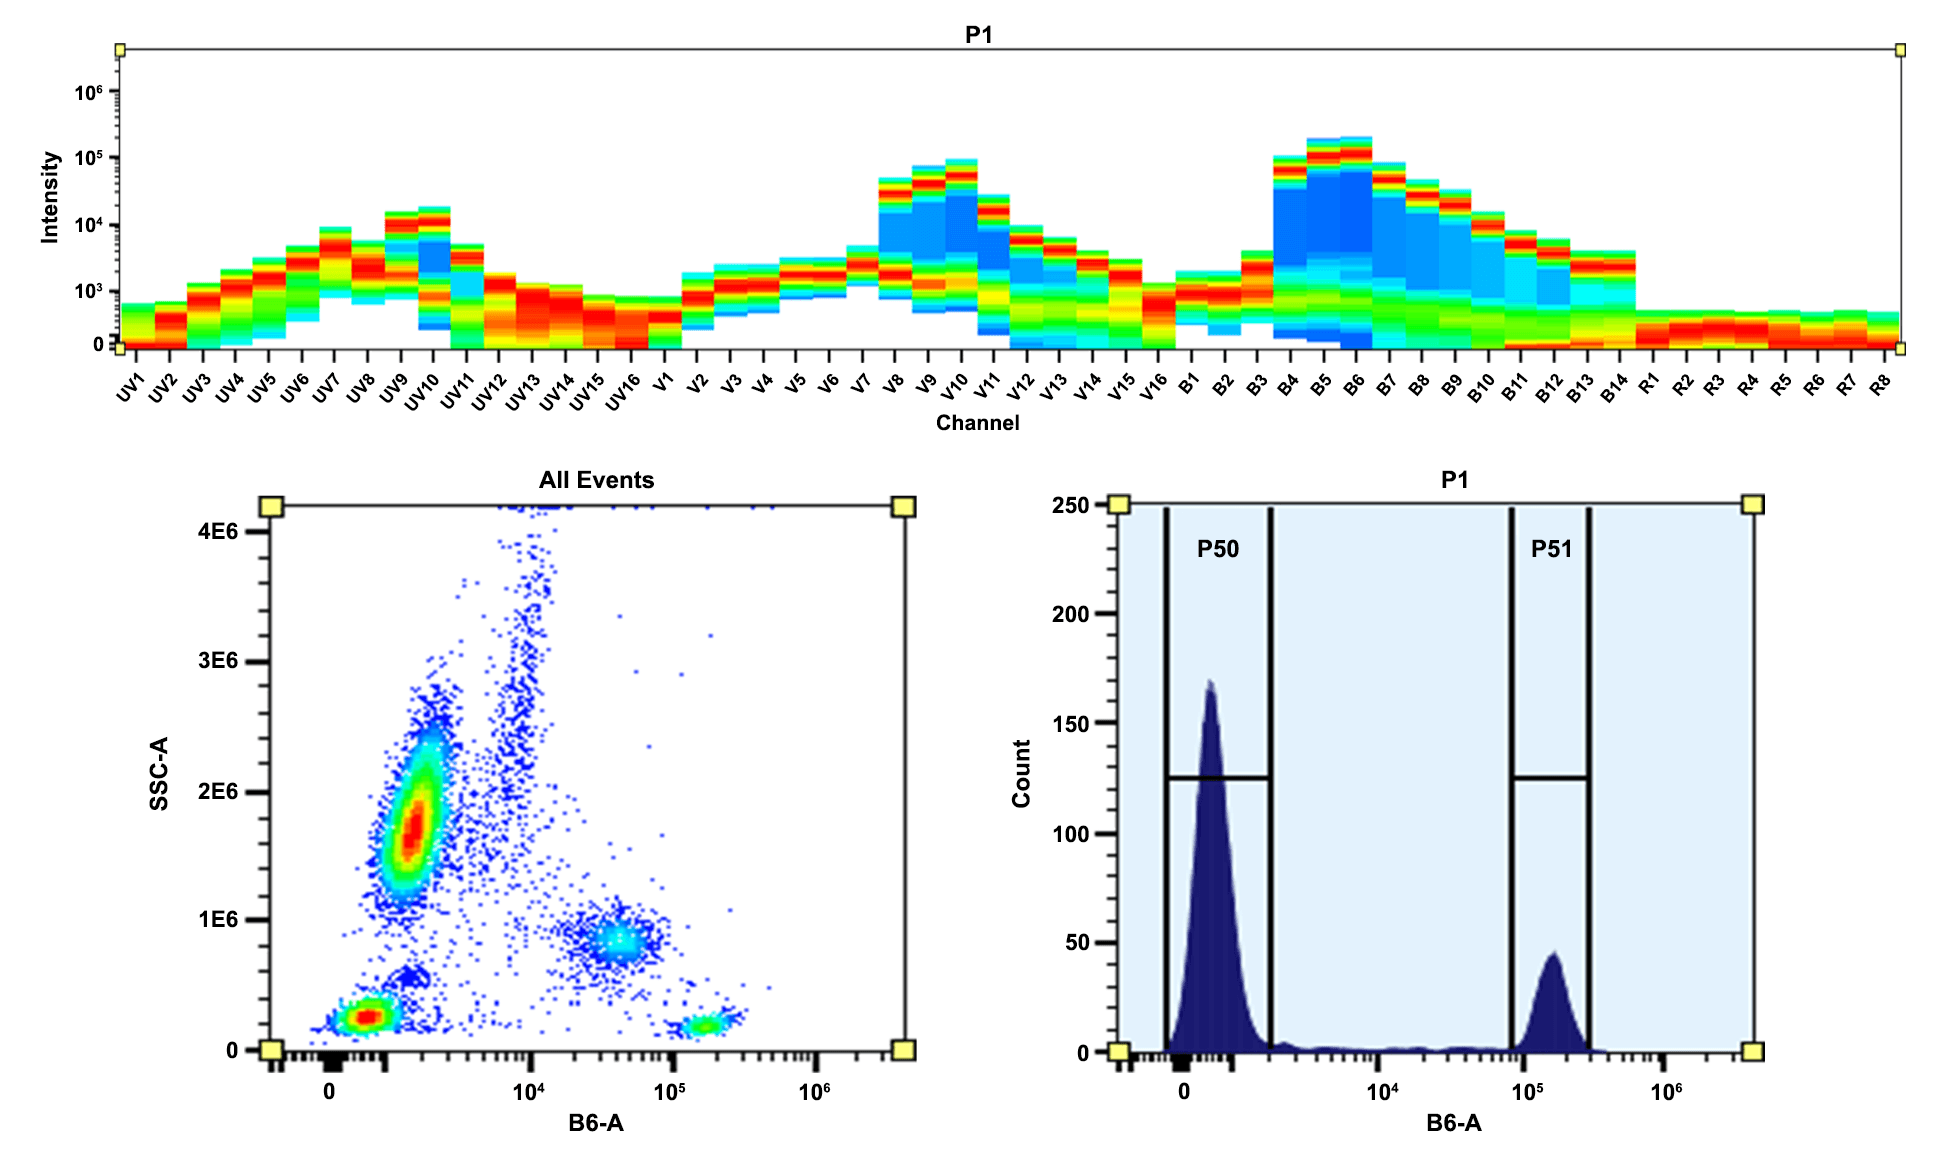 Top) Spectral pattern was generated using a 4-laser spectral cytometer. Spatially offset lasers (355 nm, 405 nm, 488 nm, and 640 nm) were used to create four distinct emission profiles, then, when combined, yielded the overall spectral signature. Bottom) Flow cytometry analysis of whole blood cells stained with PE/iFluor® 594 anti-human CD4 *SK3* conjugate. The fluorescence signal was monitored using an Aurora flow cytometer in the PE/iFluor® 594 specific B6-A channel.
